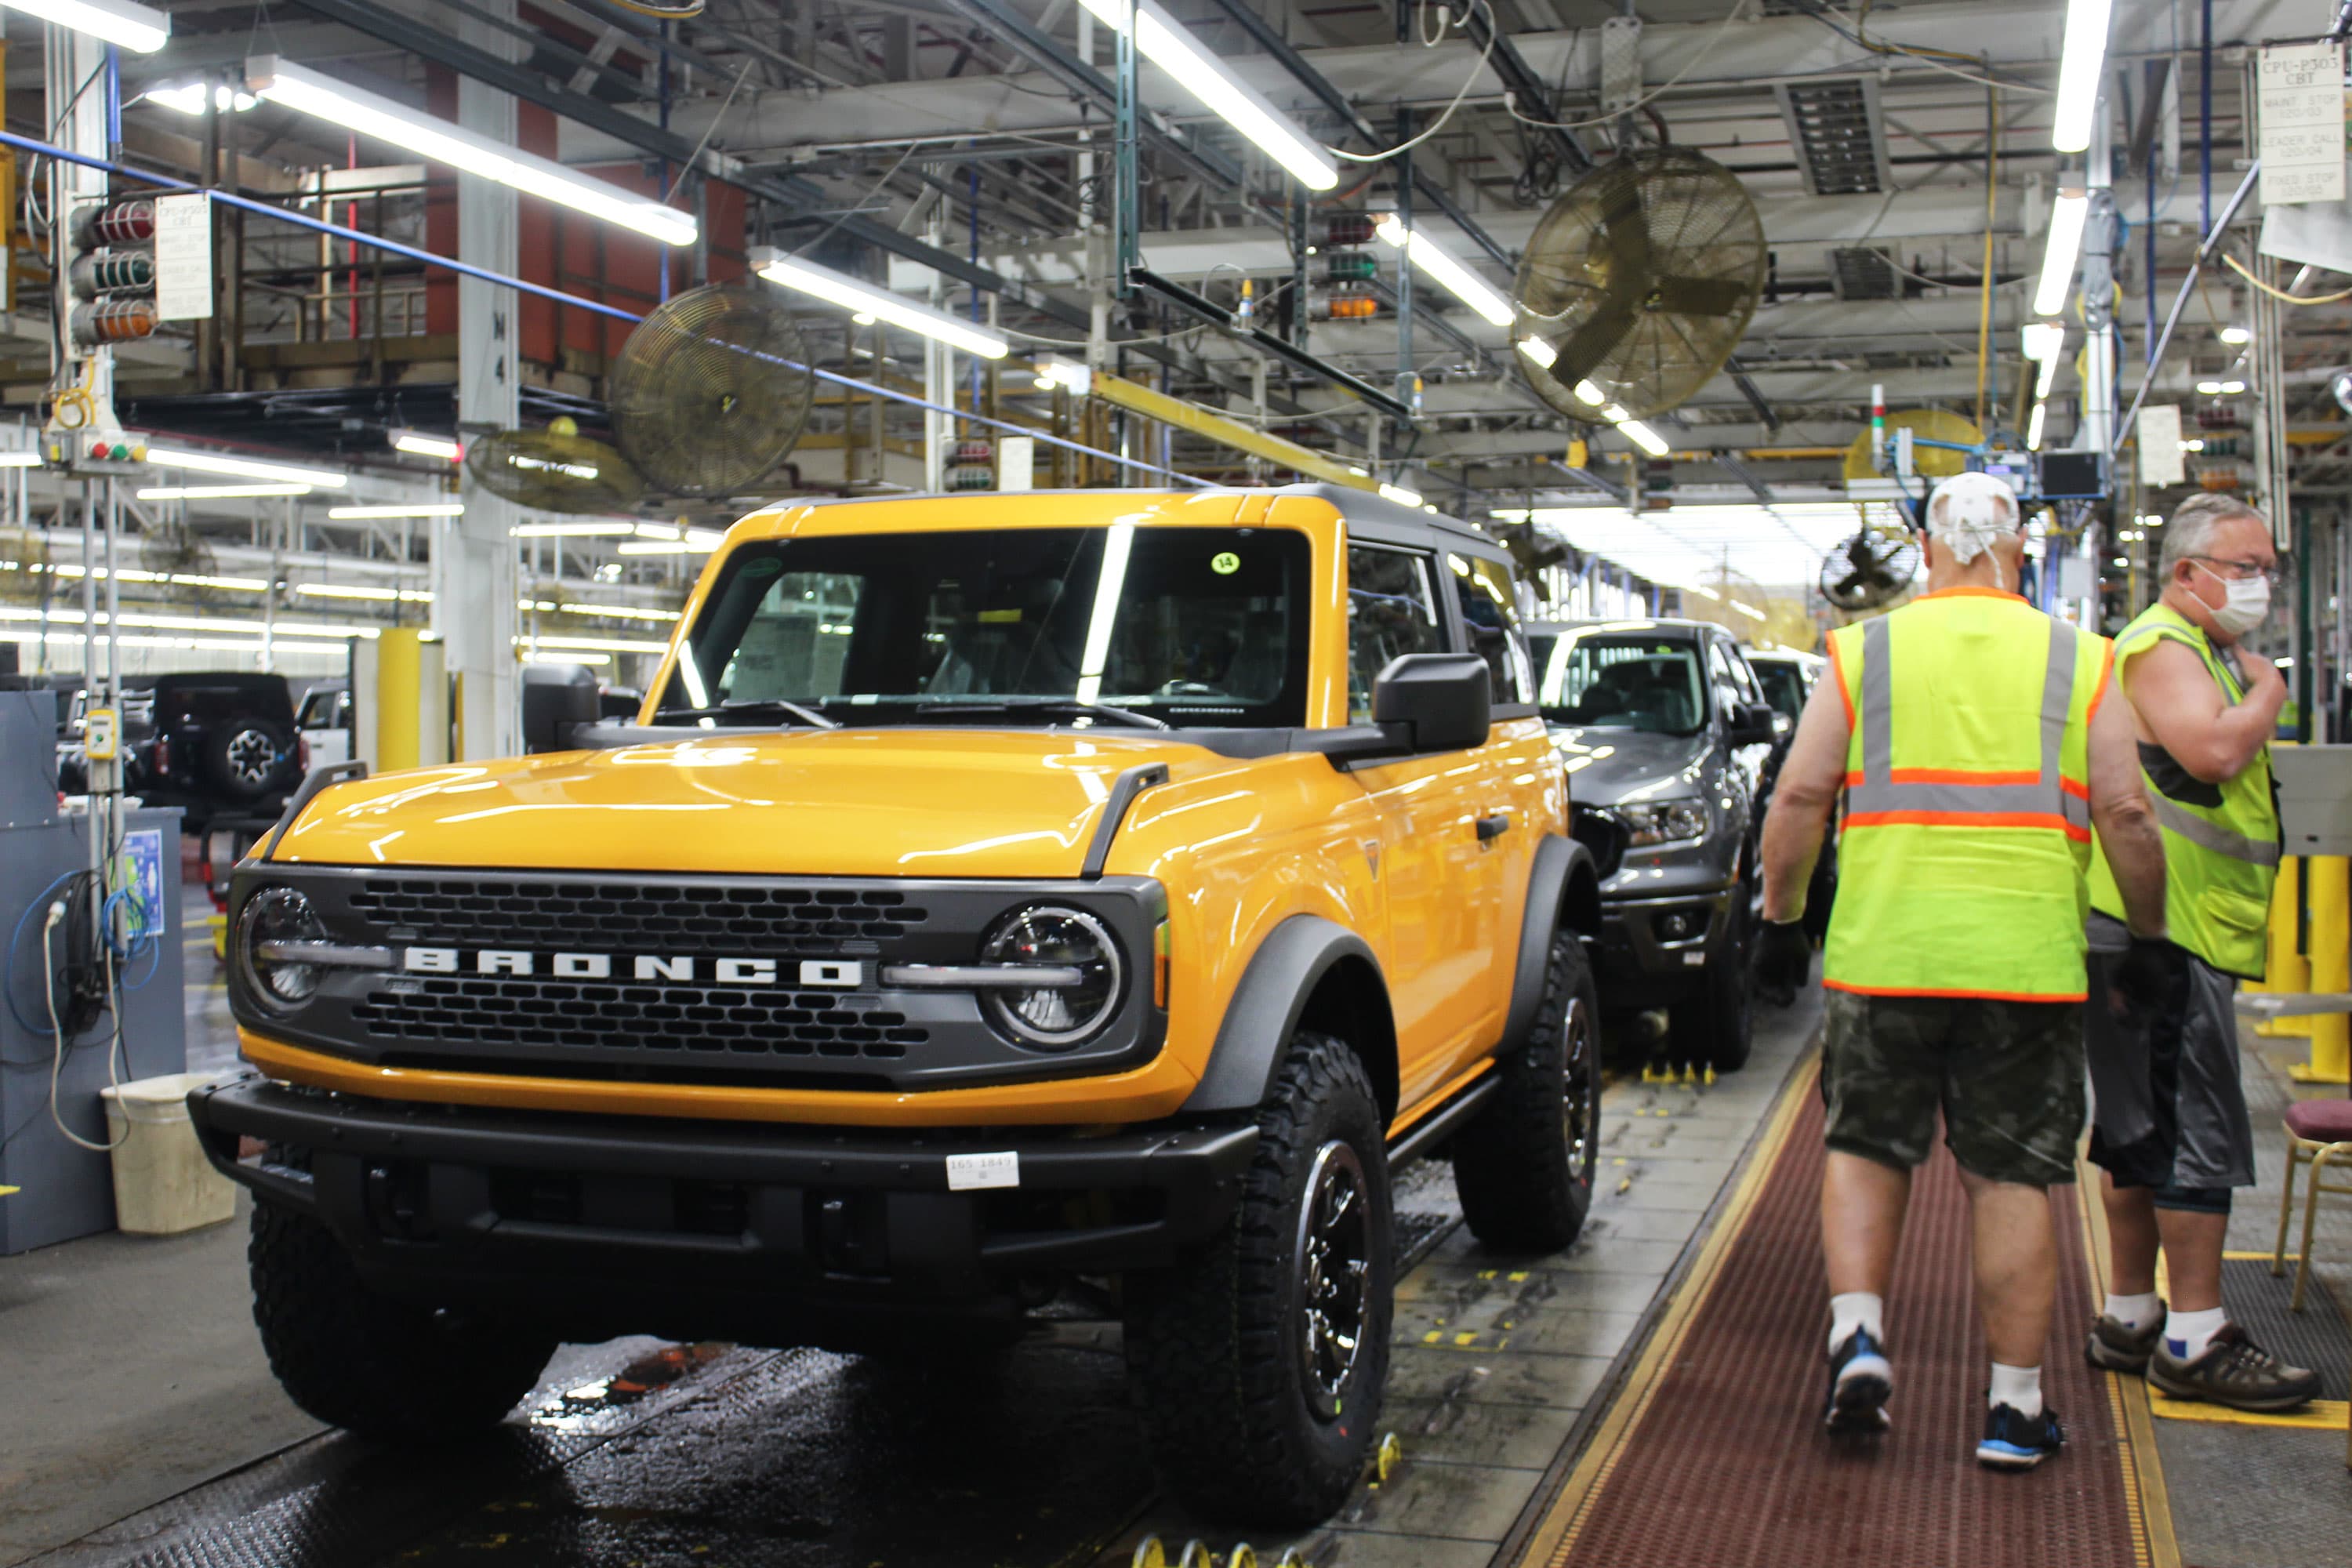 Production issues to delay Ford Bronco and Mustang Mach-E deliveries